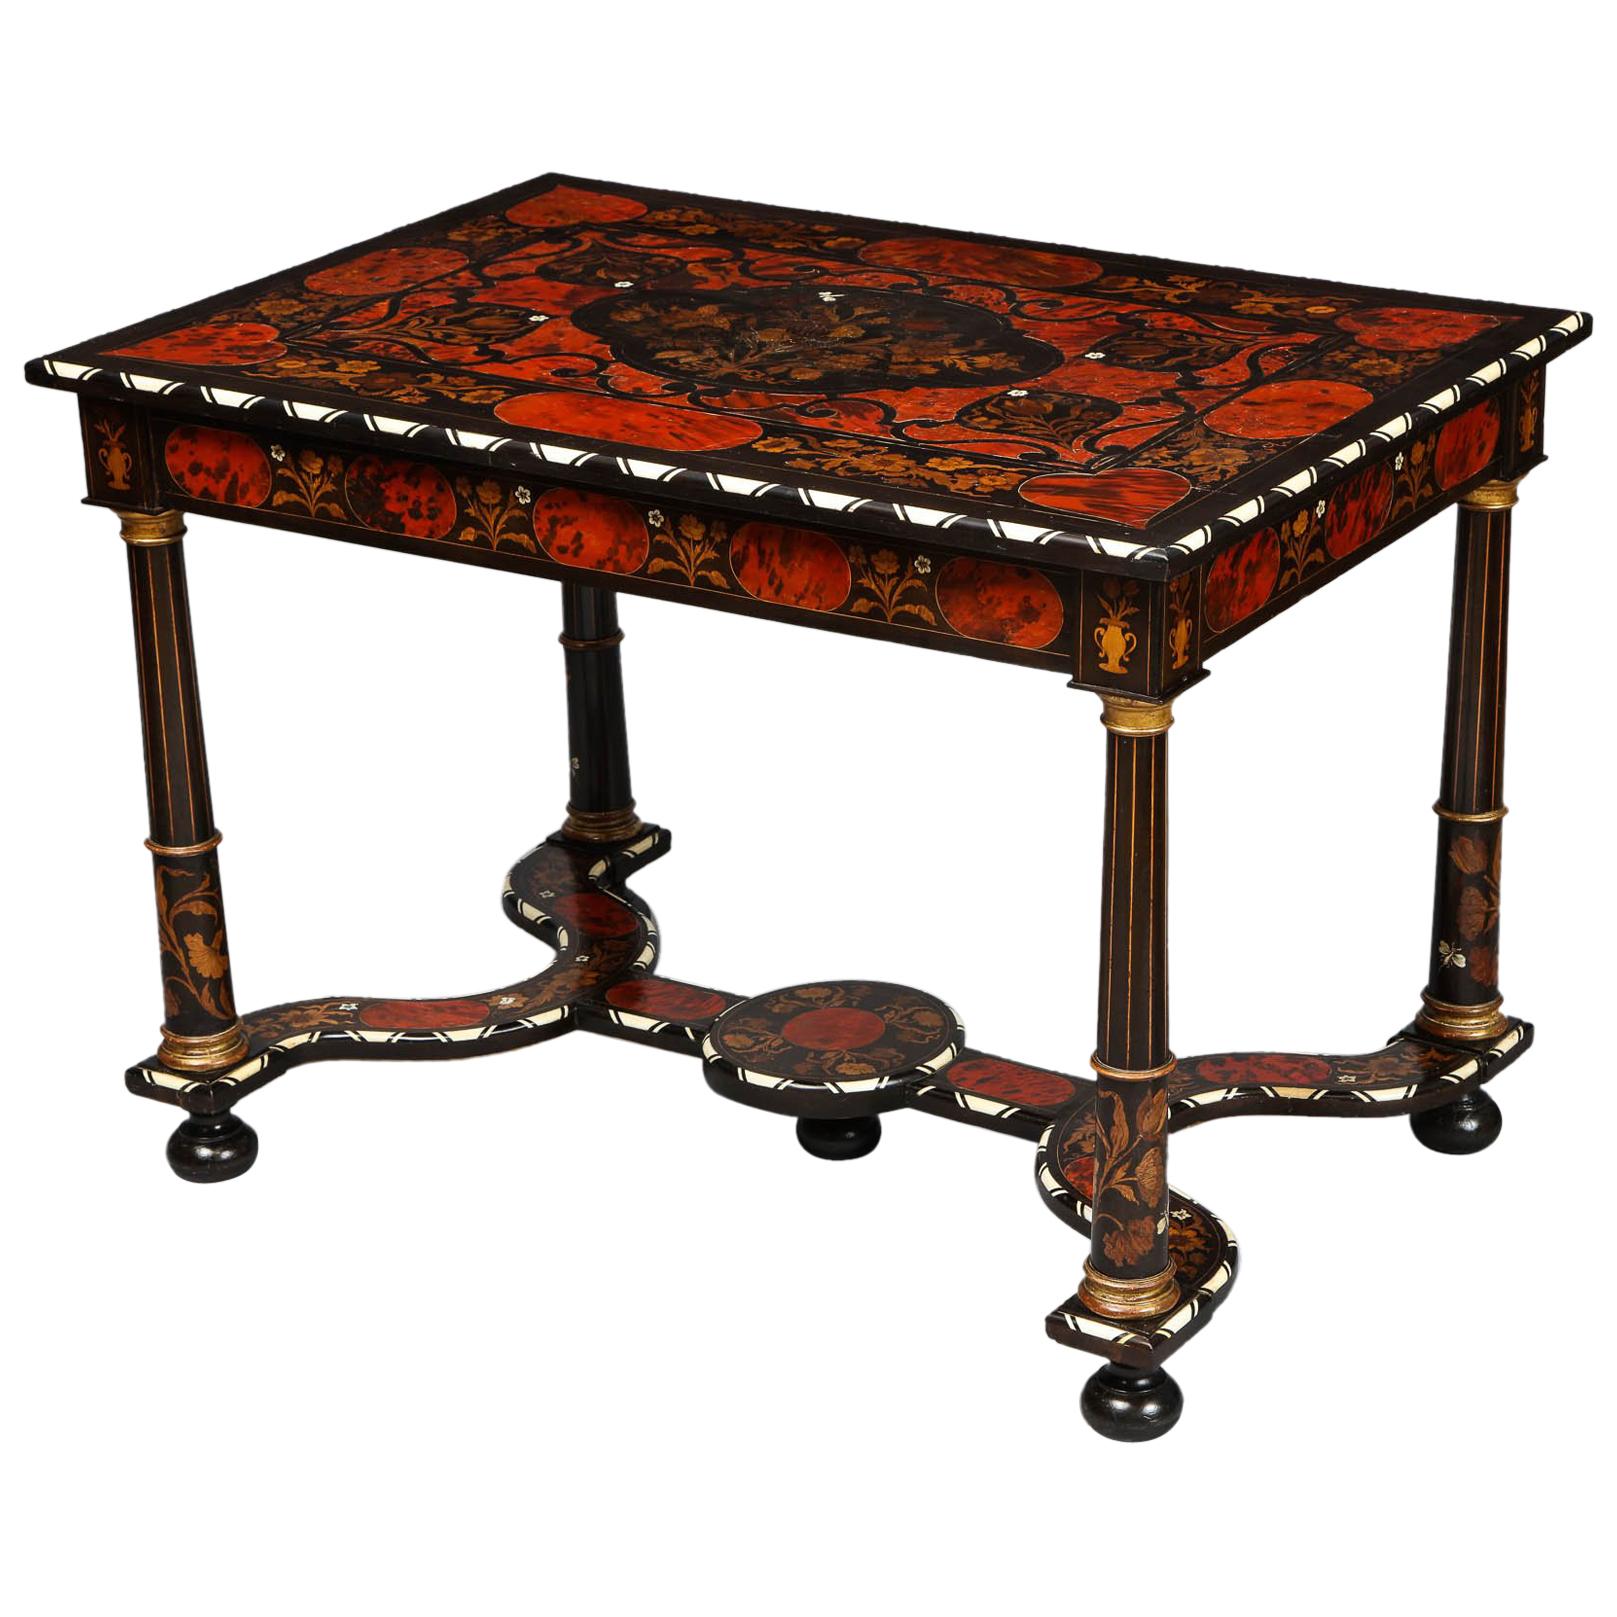 Flemish Baroque Marquetry Decorated Table